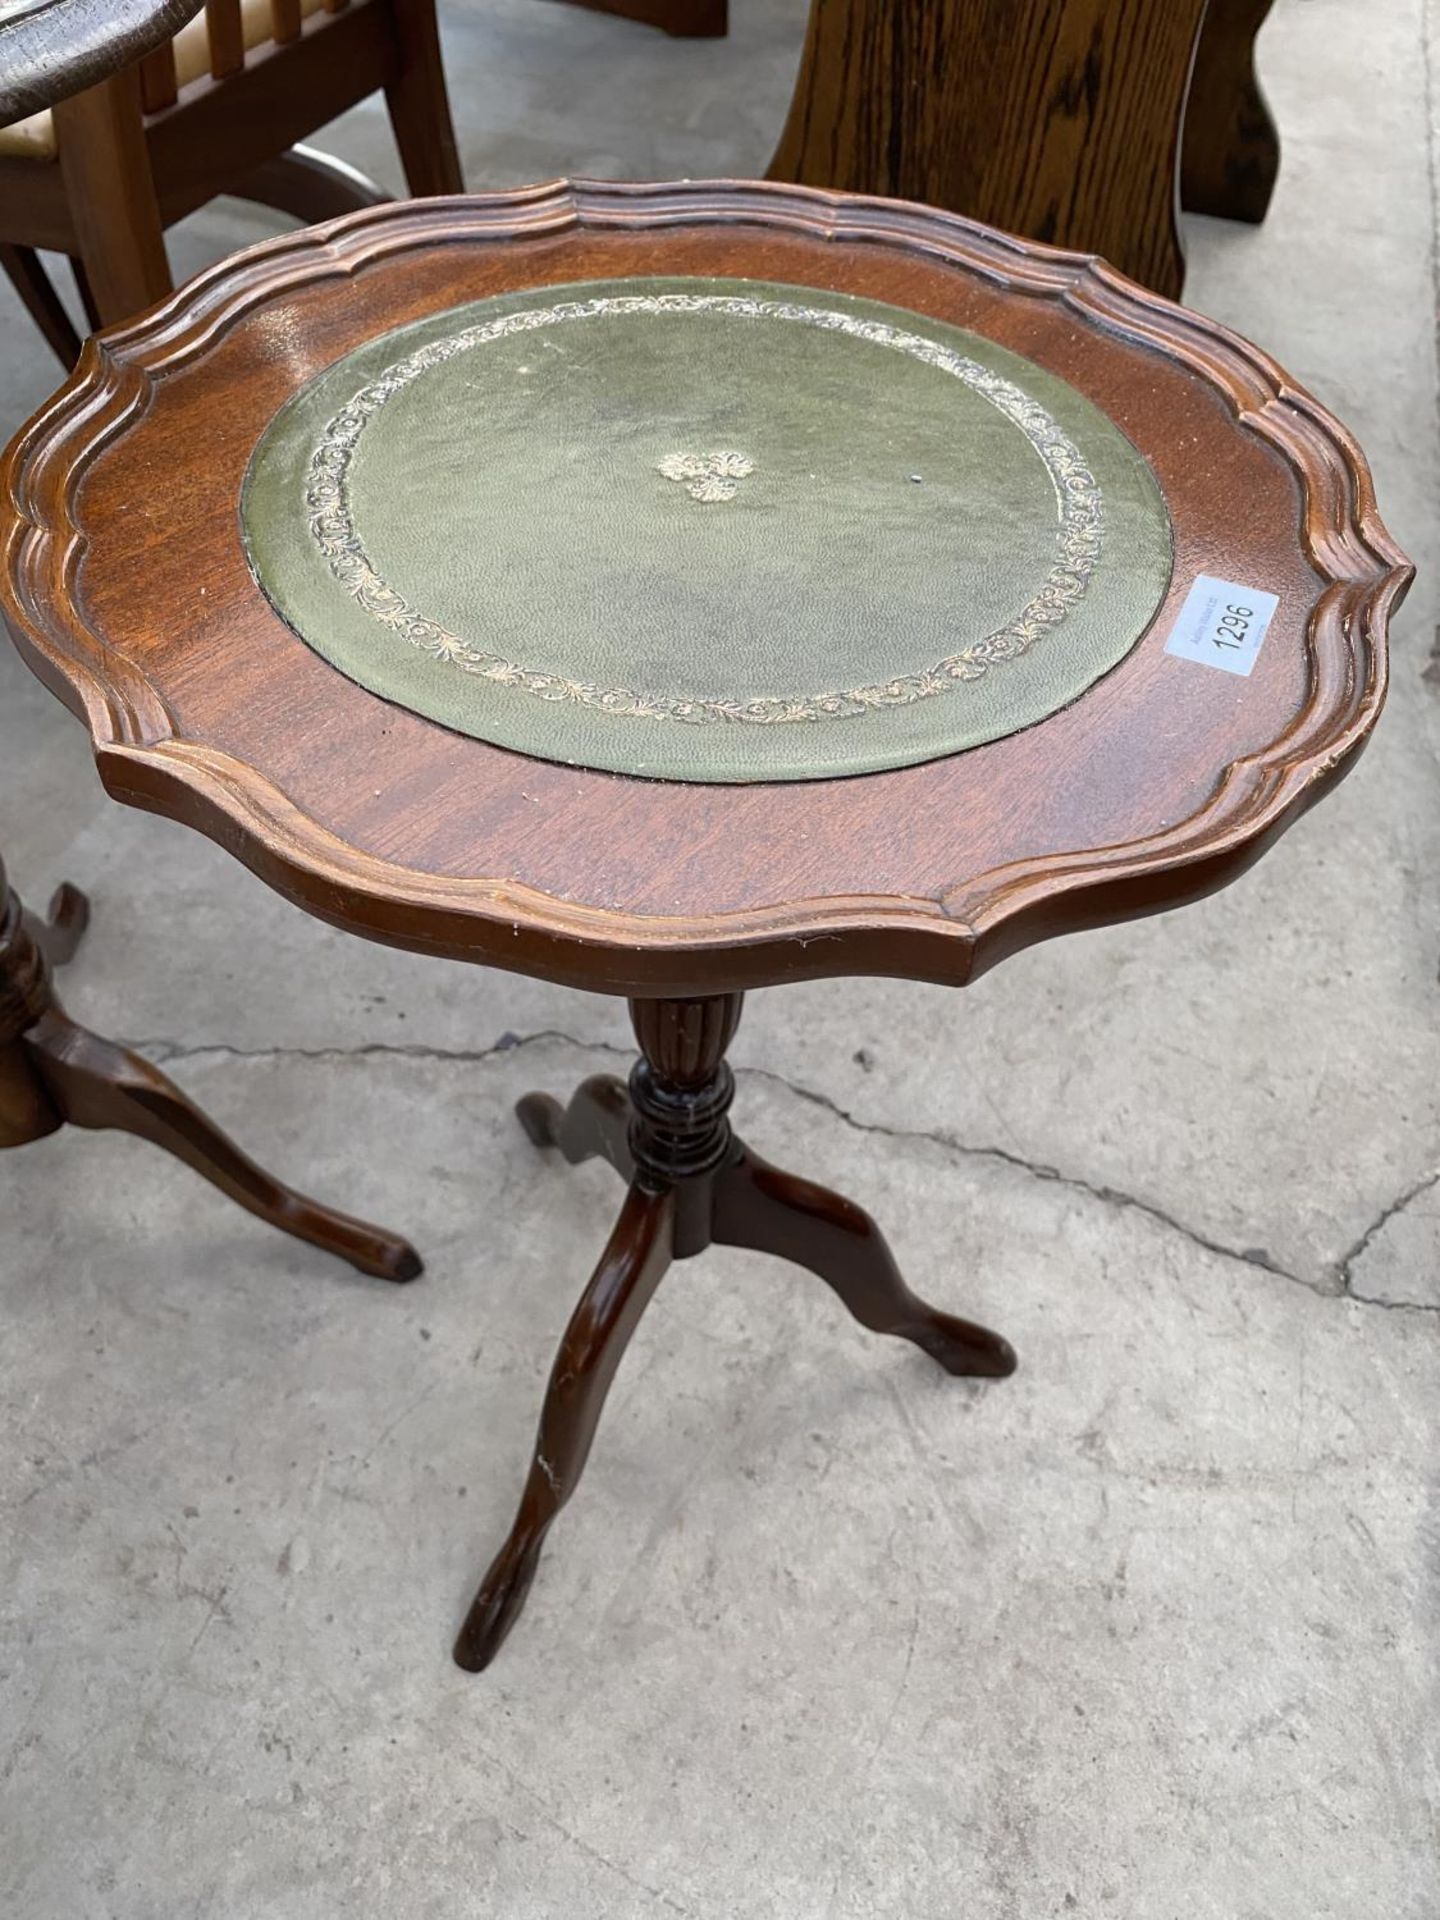 A MAHOGANY WINE TABLE WITH LEATHER TOP AND AN OAK WINE TABLE - Image 2 of 3